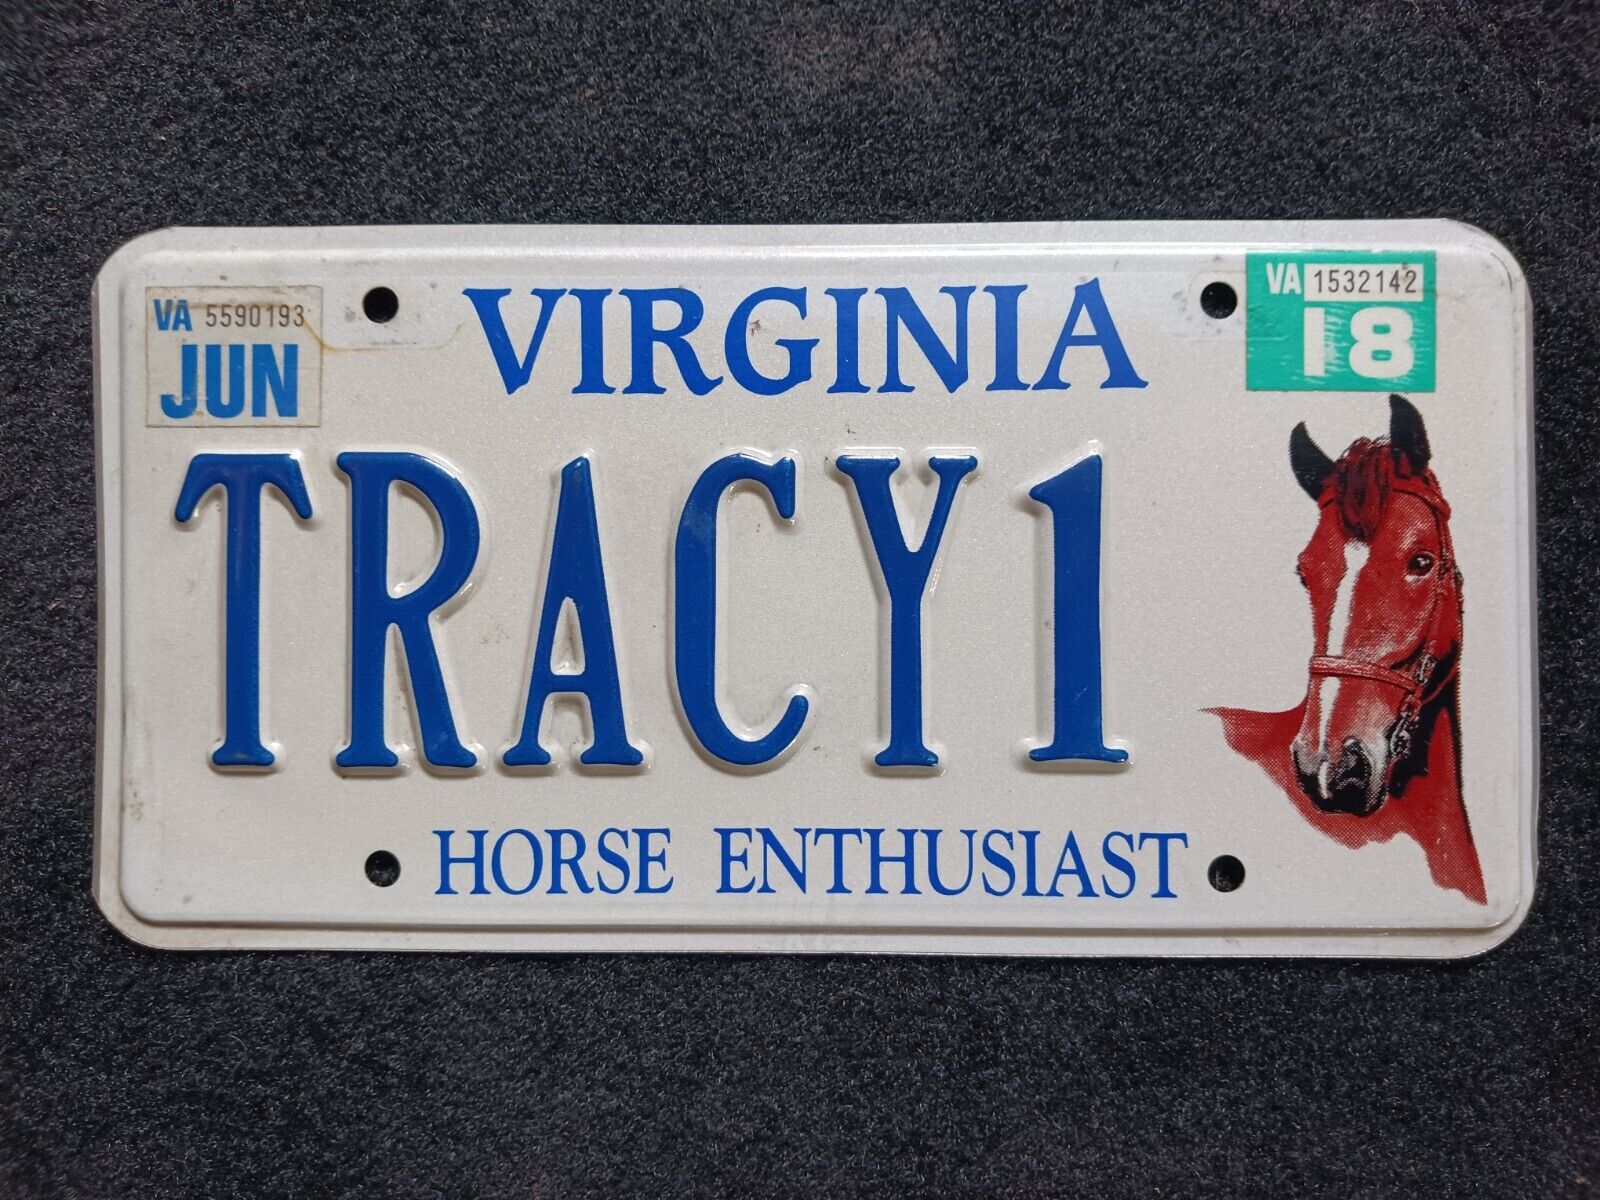 2018 Virginia Horse Enthusiast TRACY1 Personalized Vanity License Plate